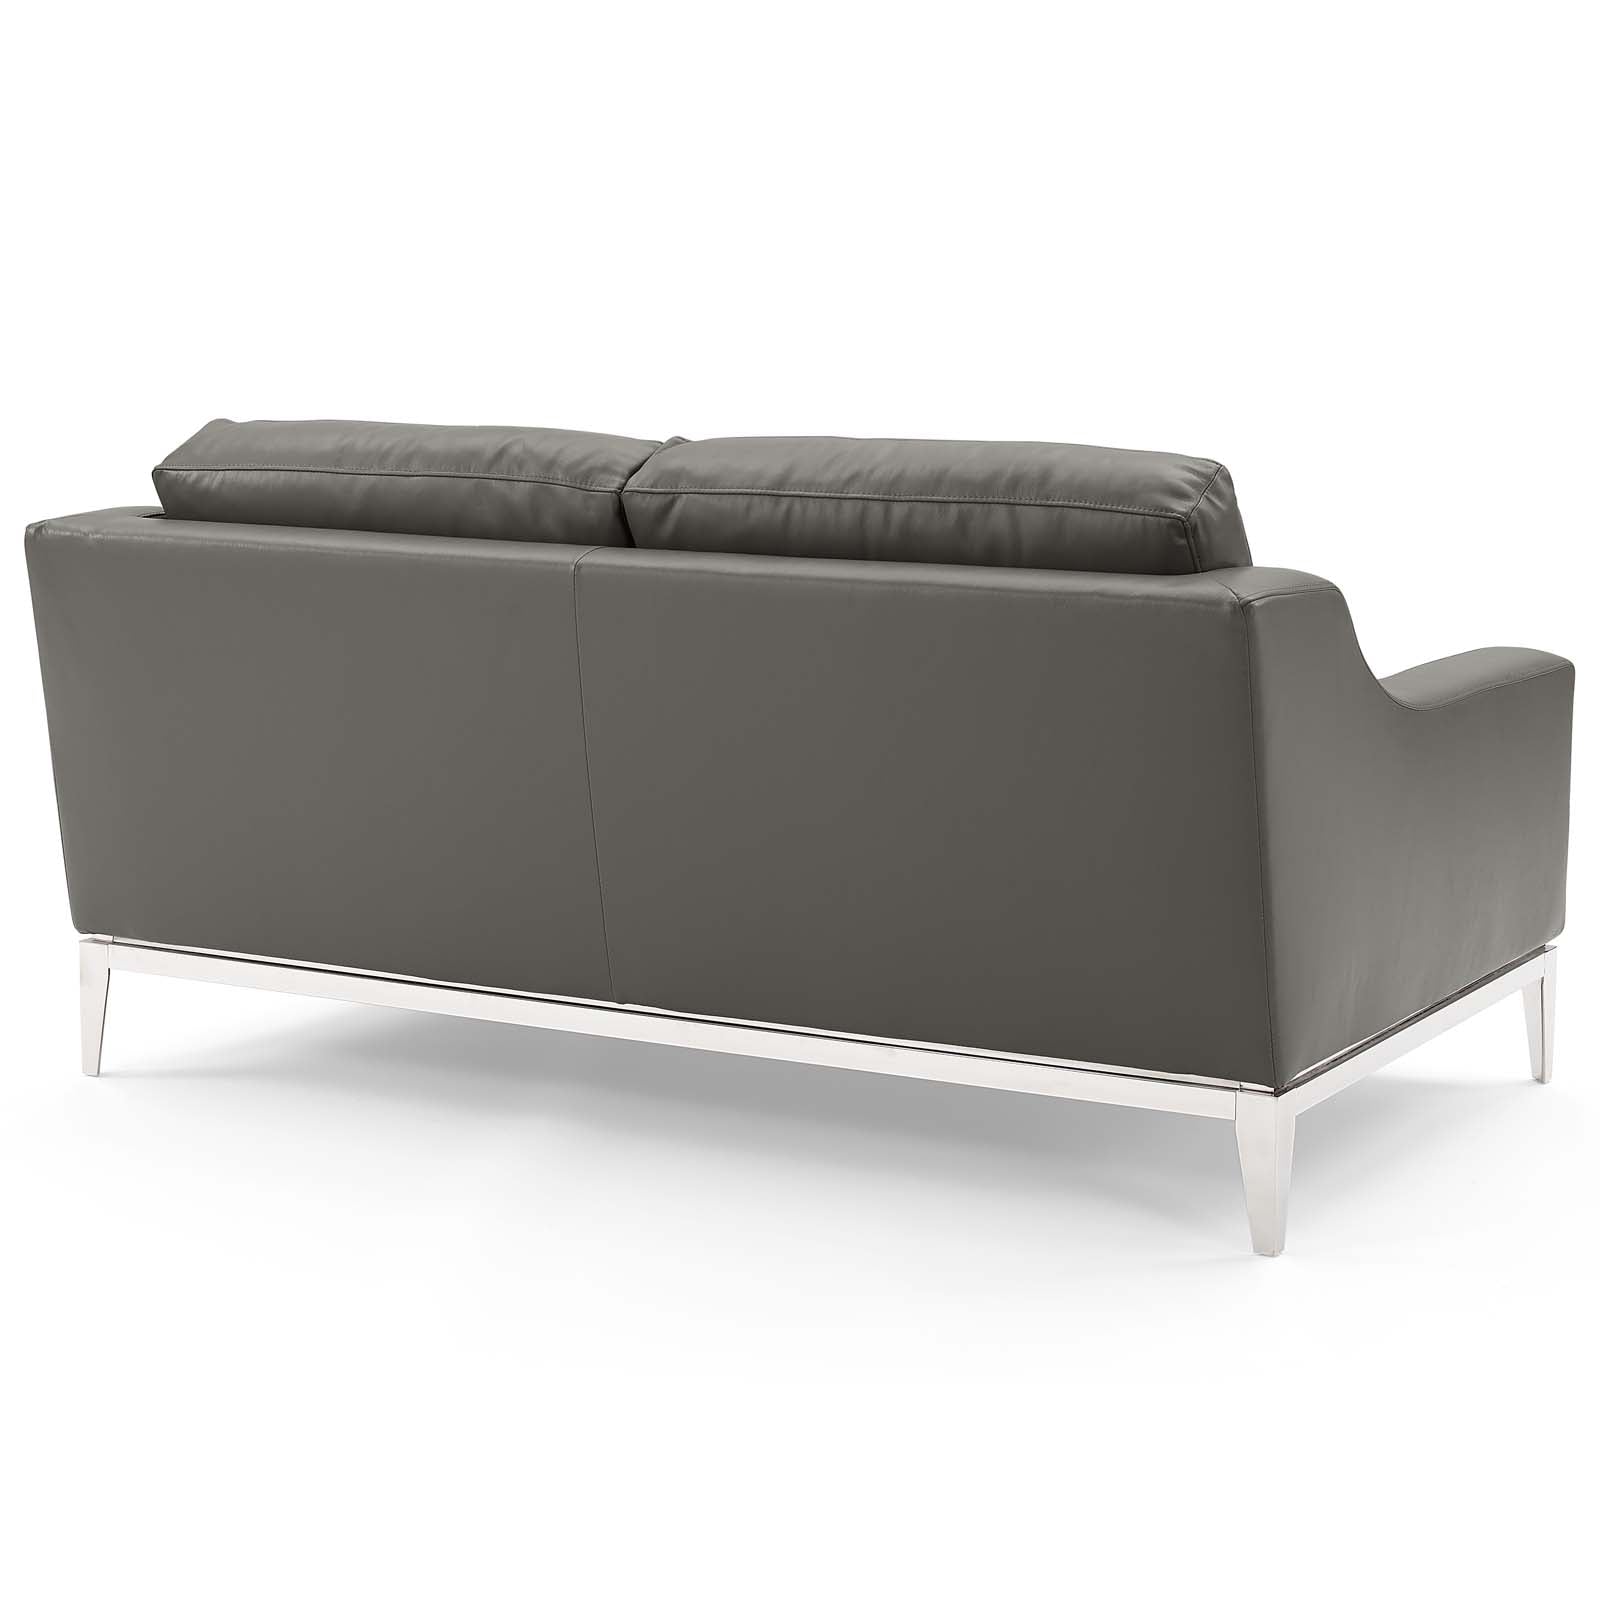 Modway Sofas & Couches - Harness-Stainless-Steel-Base-Leather-Sofa-and-Loveseat-Set-Gray